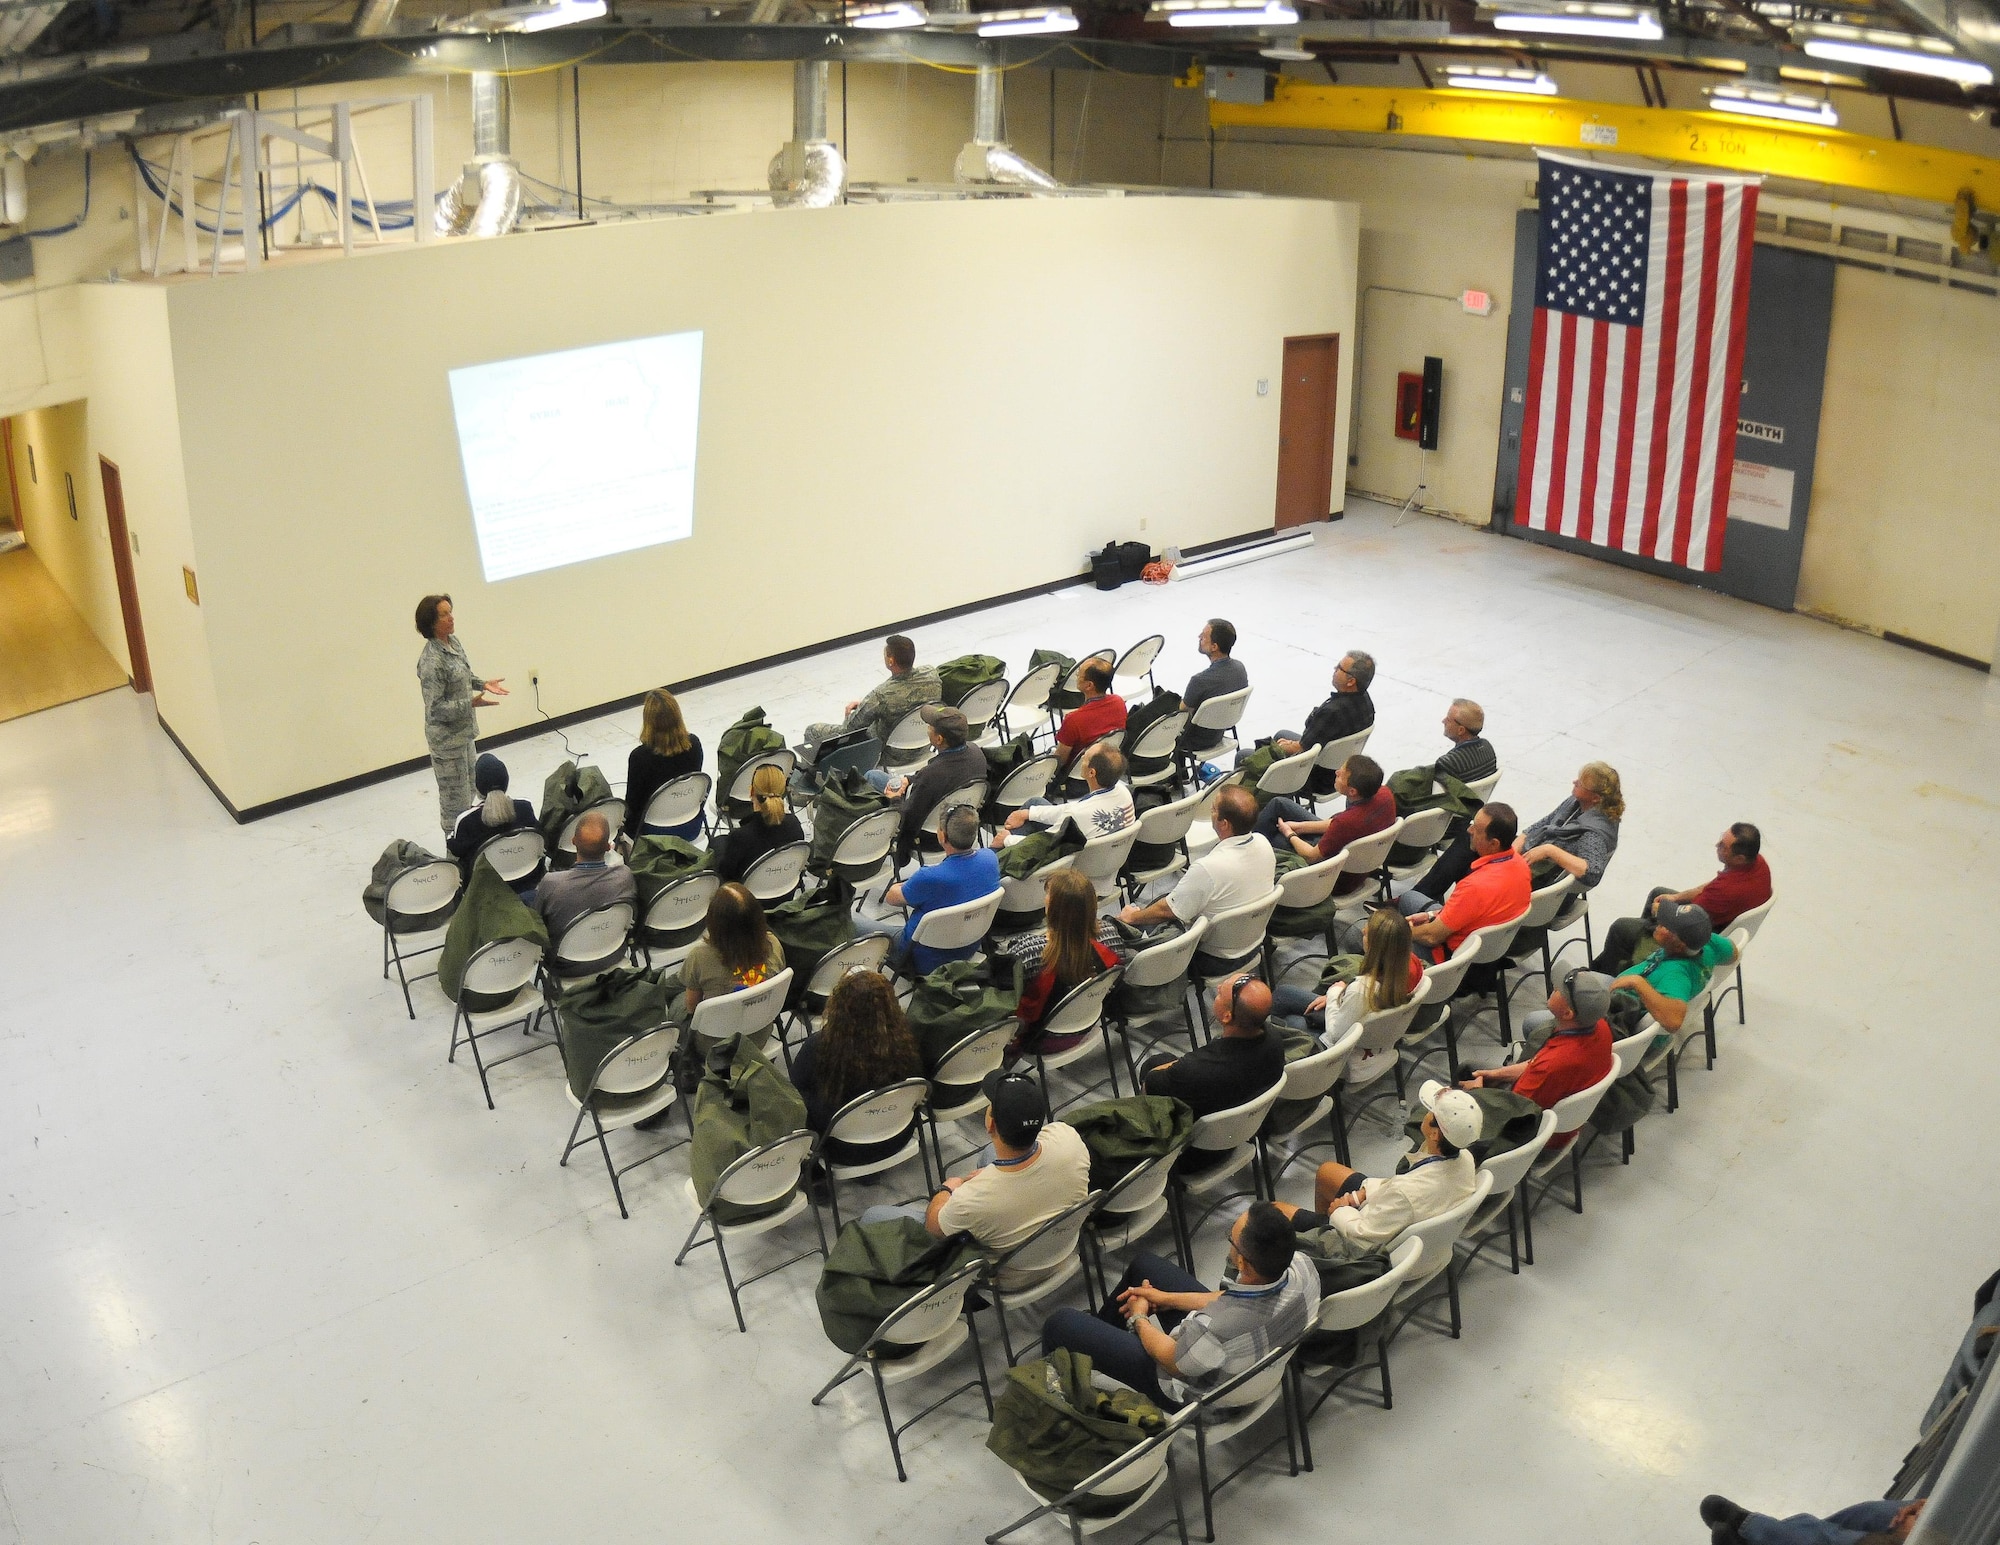 Lt. Col. Shawn Ortiz, 944th Operations Group intelligence officer, gives a simulated intelligence brief to civilian employers Apr.1 during Bosses Day 2017 at Luke Air Force Base, Ariz. (U.S. Air Force photo by Tech. Sgt. Nestor Cruz)